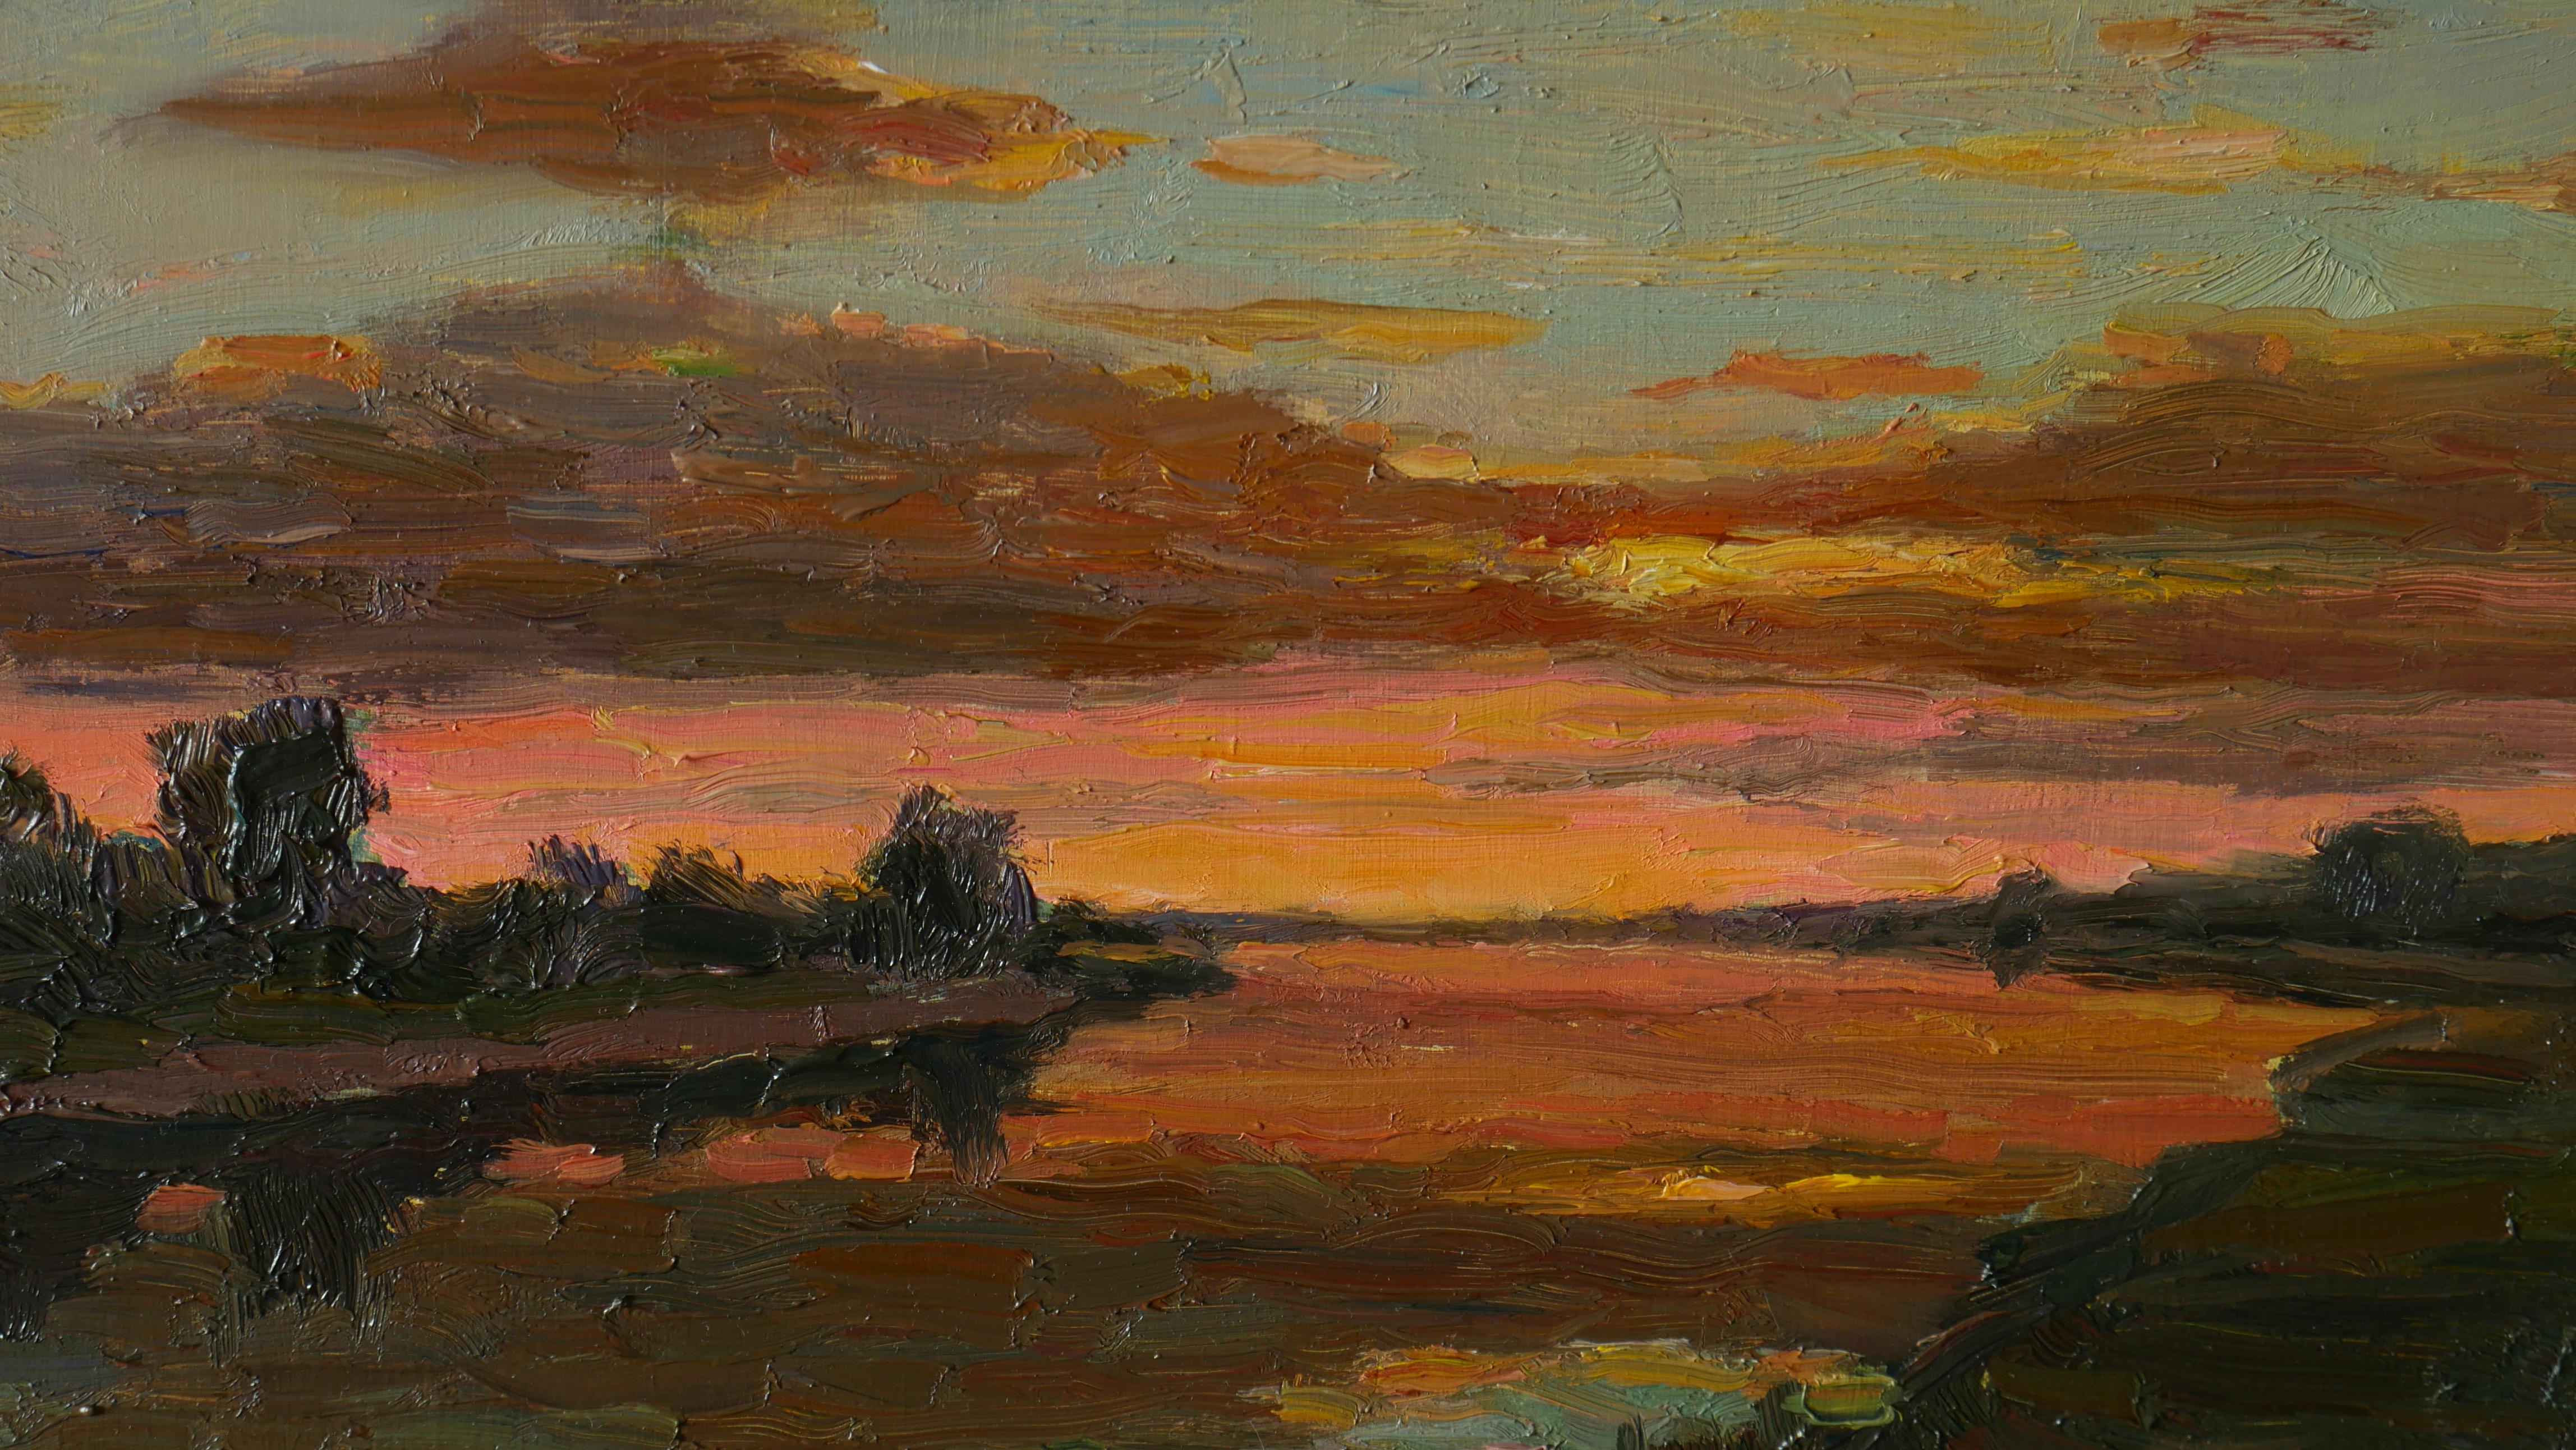 Sunset over the river - sunset landscape painting For Sale 1